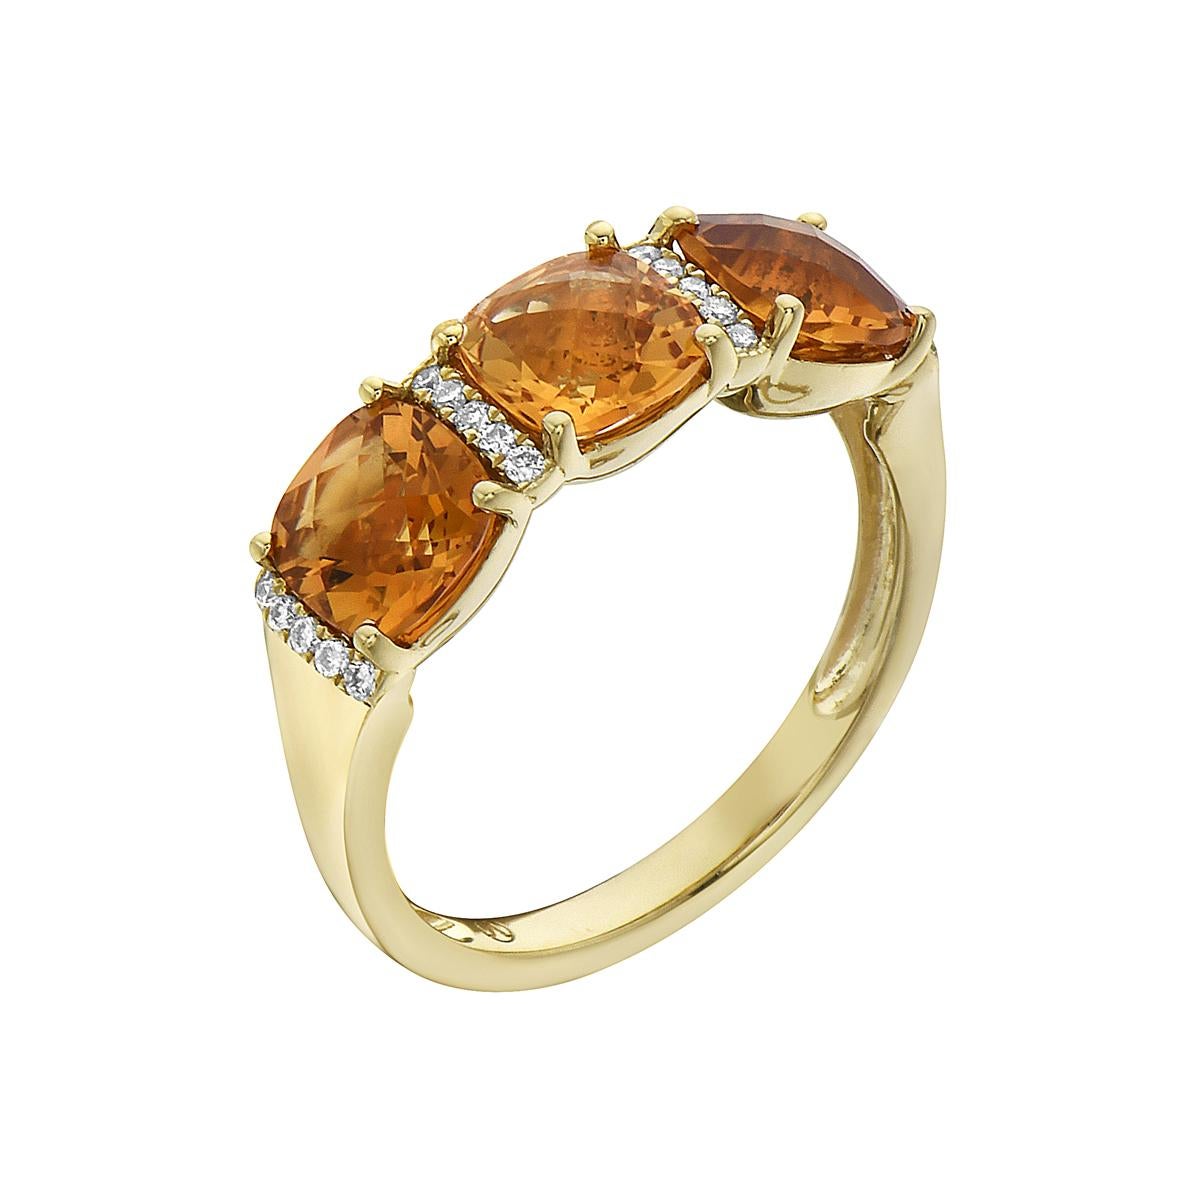 With this exquisite semi-precious citrine ring, style and glamour are in the spotlight. This 14-karat cushion cut ring is made from 3.3 grams of gold, 3 citrines totaling 2.38 karats, and is surrounded by 20 round SI1-SI2, GH color diamonds totaling